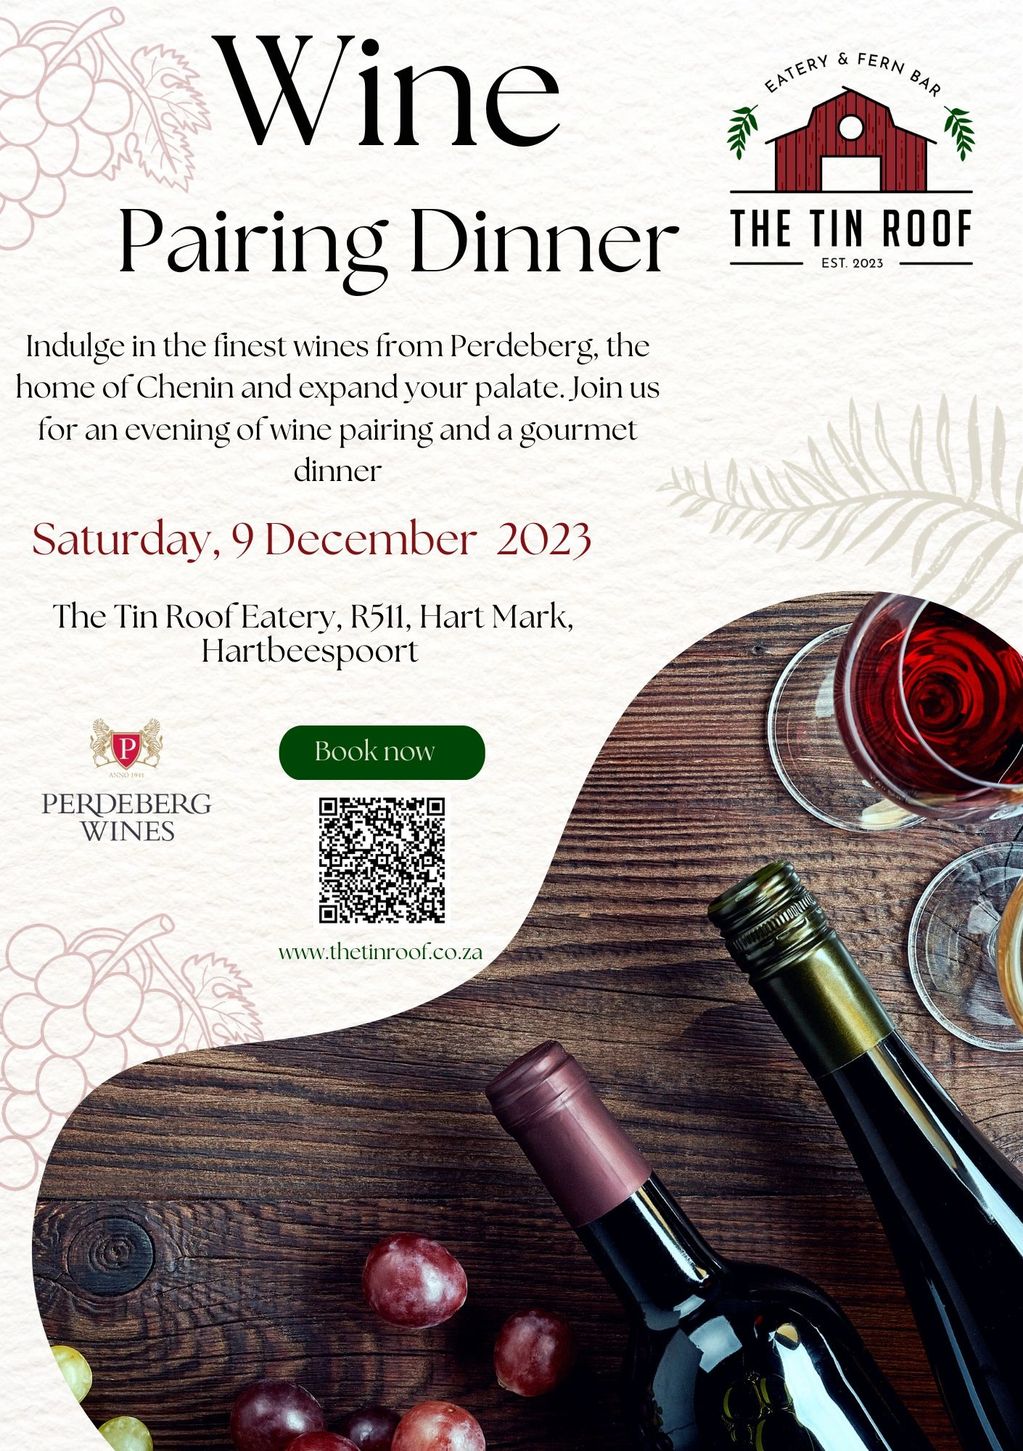 Wine Pairing Gourmet Dinner With The Tin Roof Eatery & Perdeberg Cellar